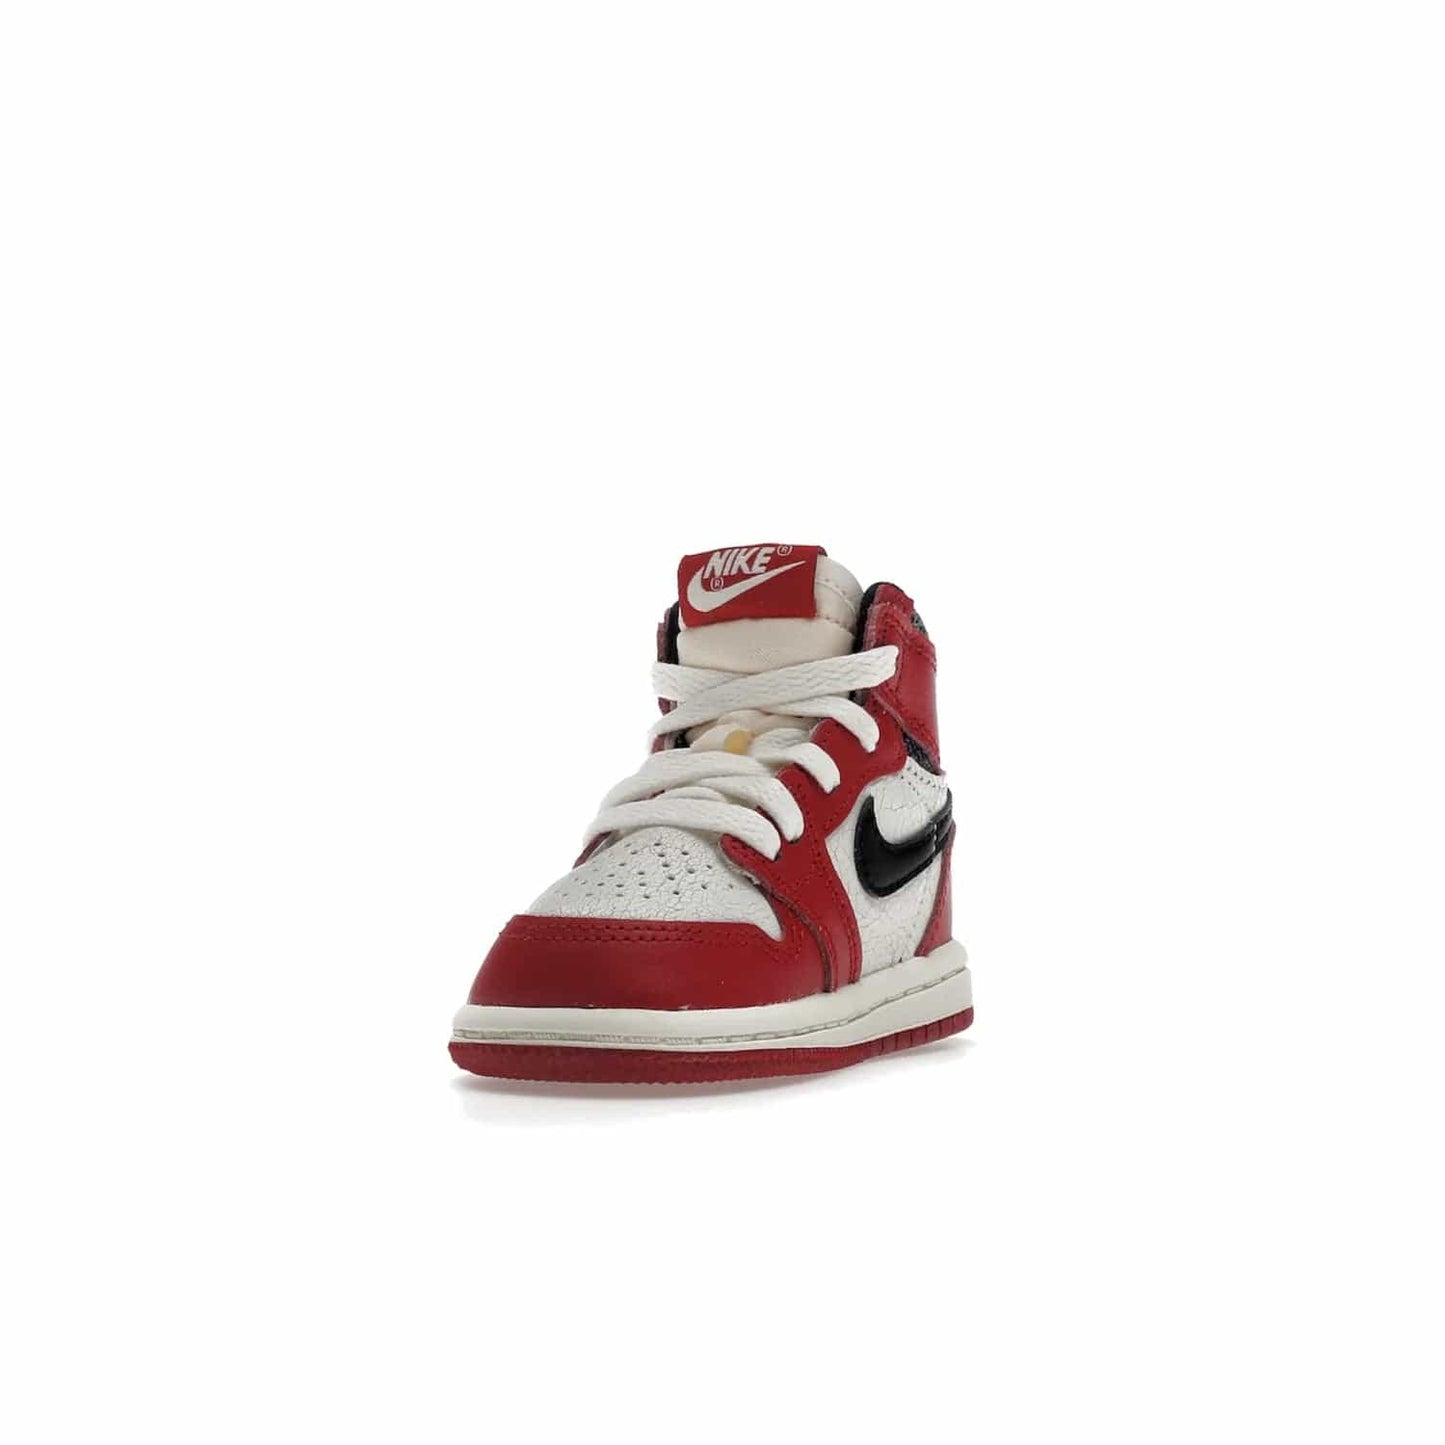 Jordan 1 Retro High OG Chicago Lost and Found (TD) - Image 13 - Only at www.BallersClubKickz.com - Introducing the Air Jordan 1 Retro High OG Lost and Found TD – a vibrant combination of 4 colors: muslin, varsity, sail and black. Featuring a crackled leather upper and AIR units for comfort and a signature Wings logo, these retro shoes add comfort and style for your little ones at $70. Get your pair before 19th December 2022!